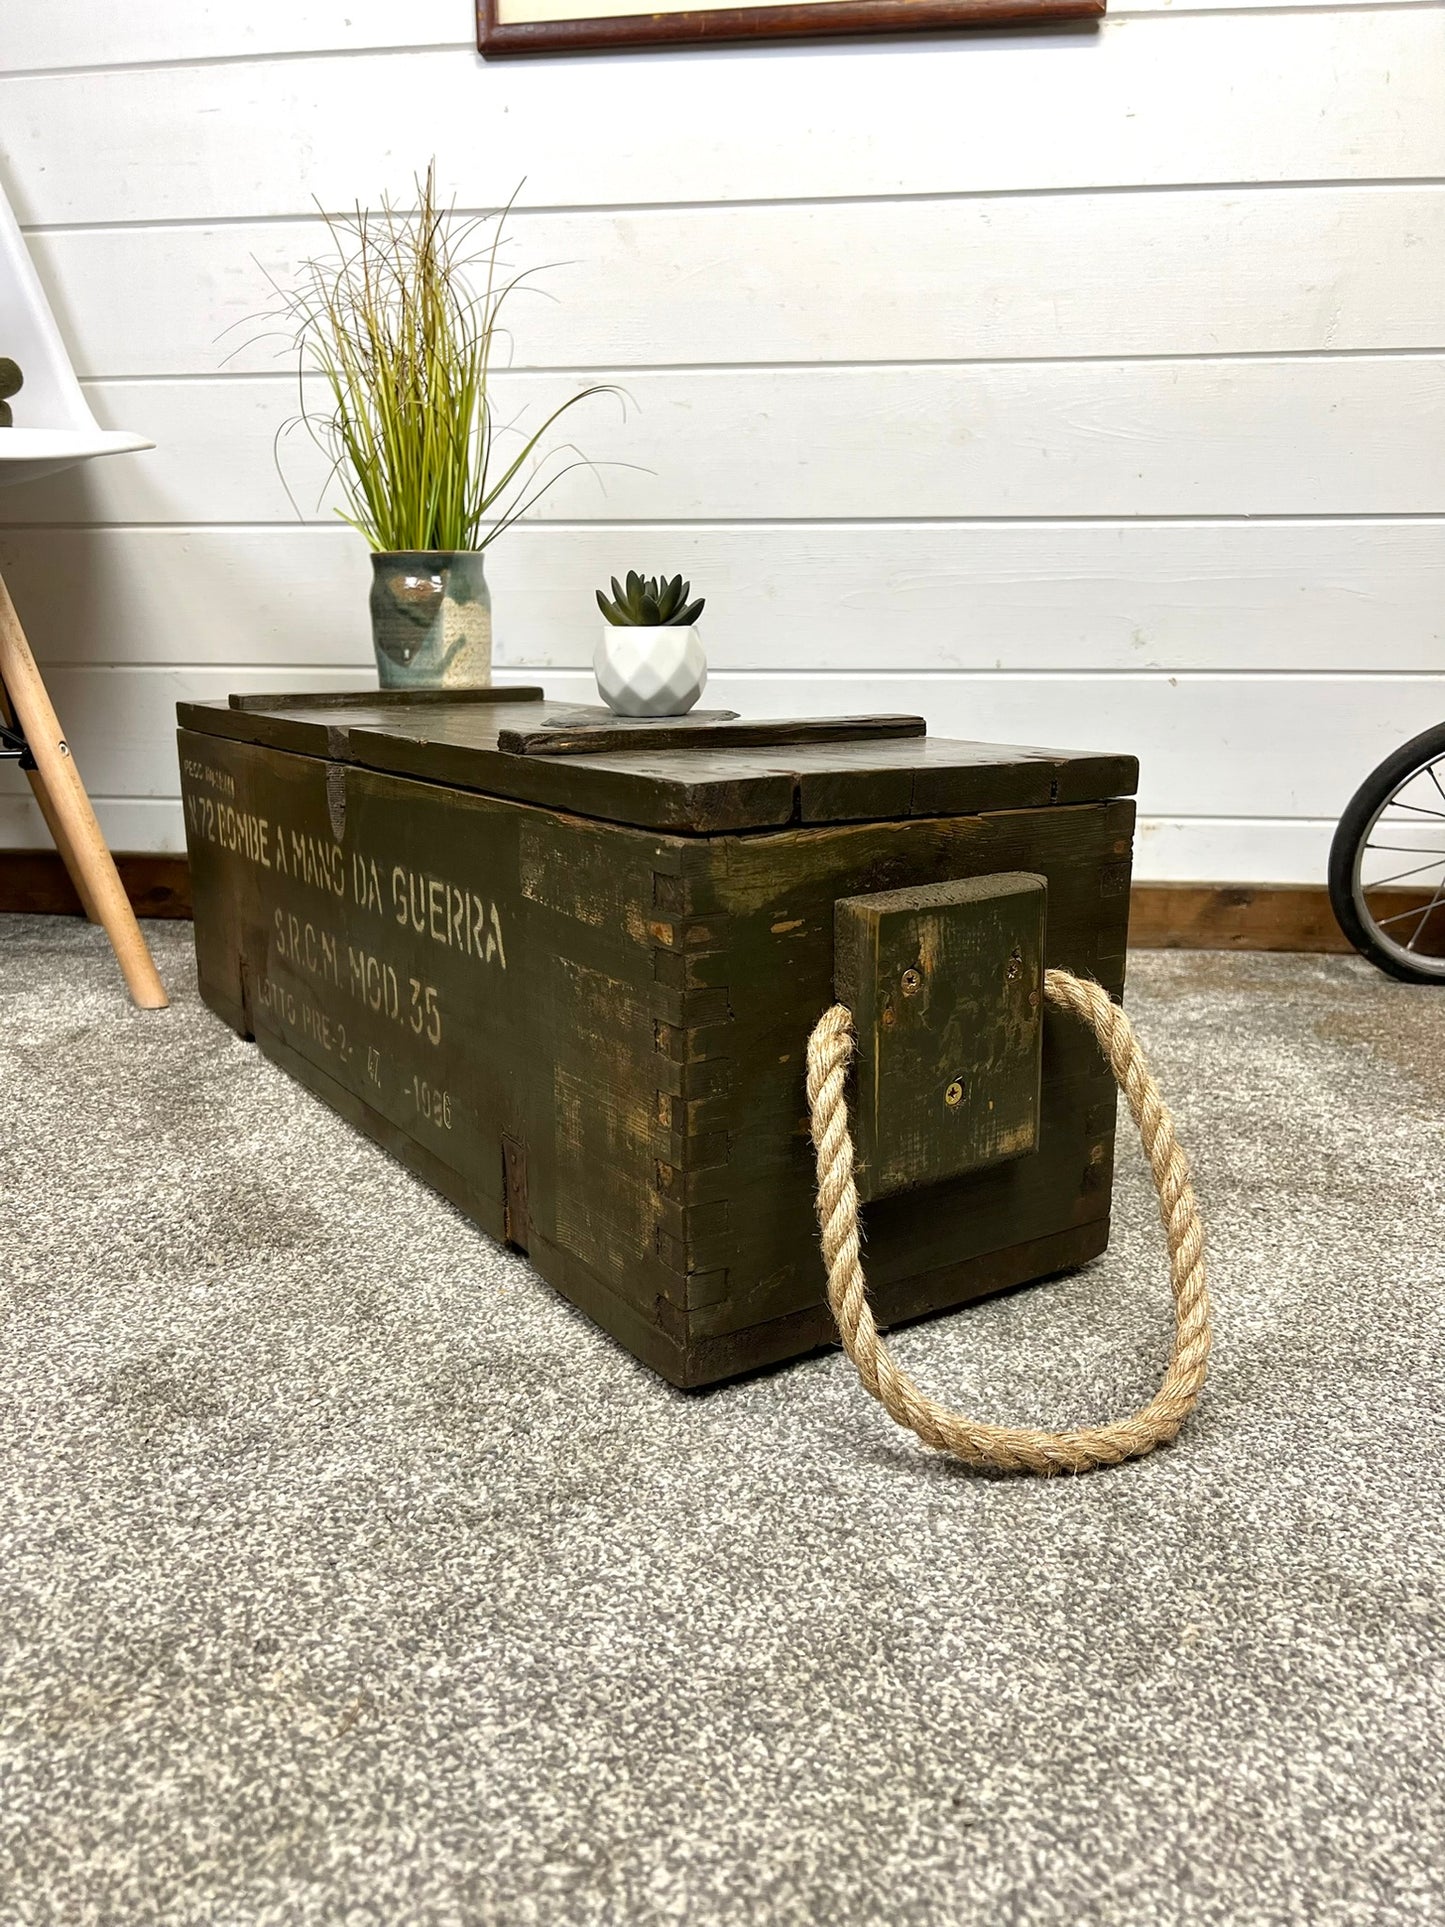 Vintage Wooden Ammo Chest Rustic Crate Storage Box Country Home Farmhouse Boho Decor